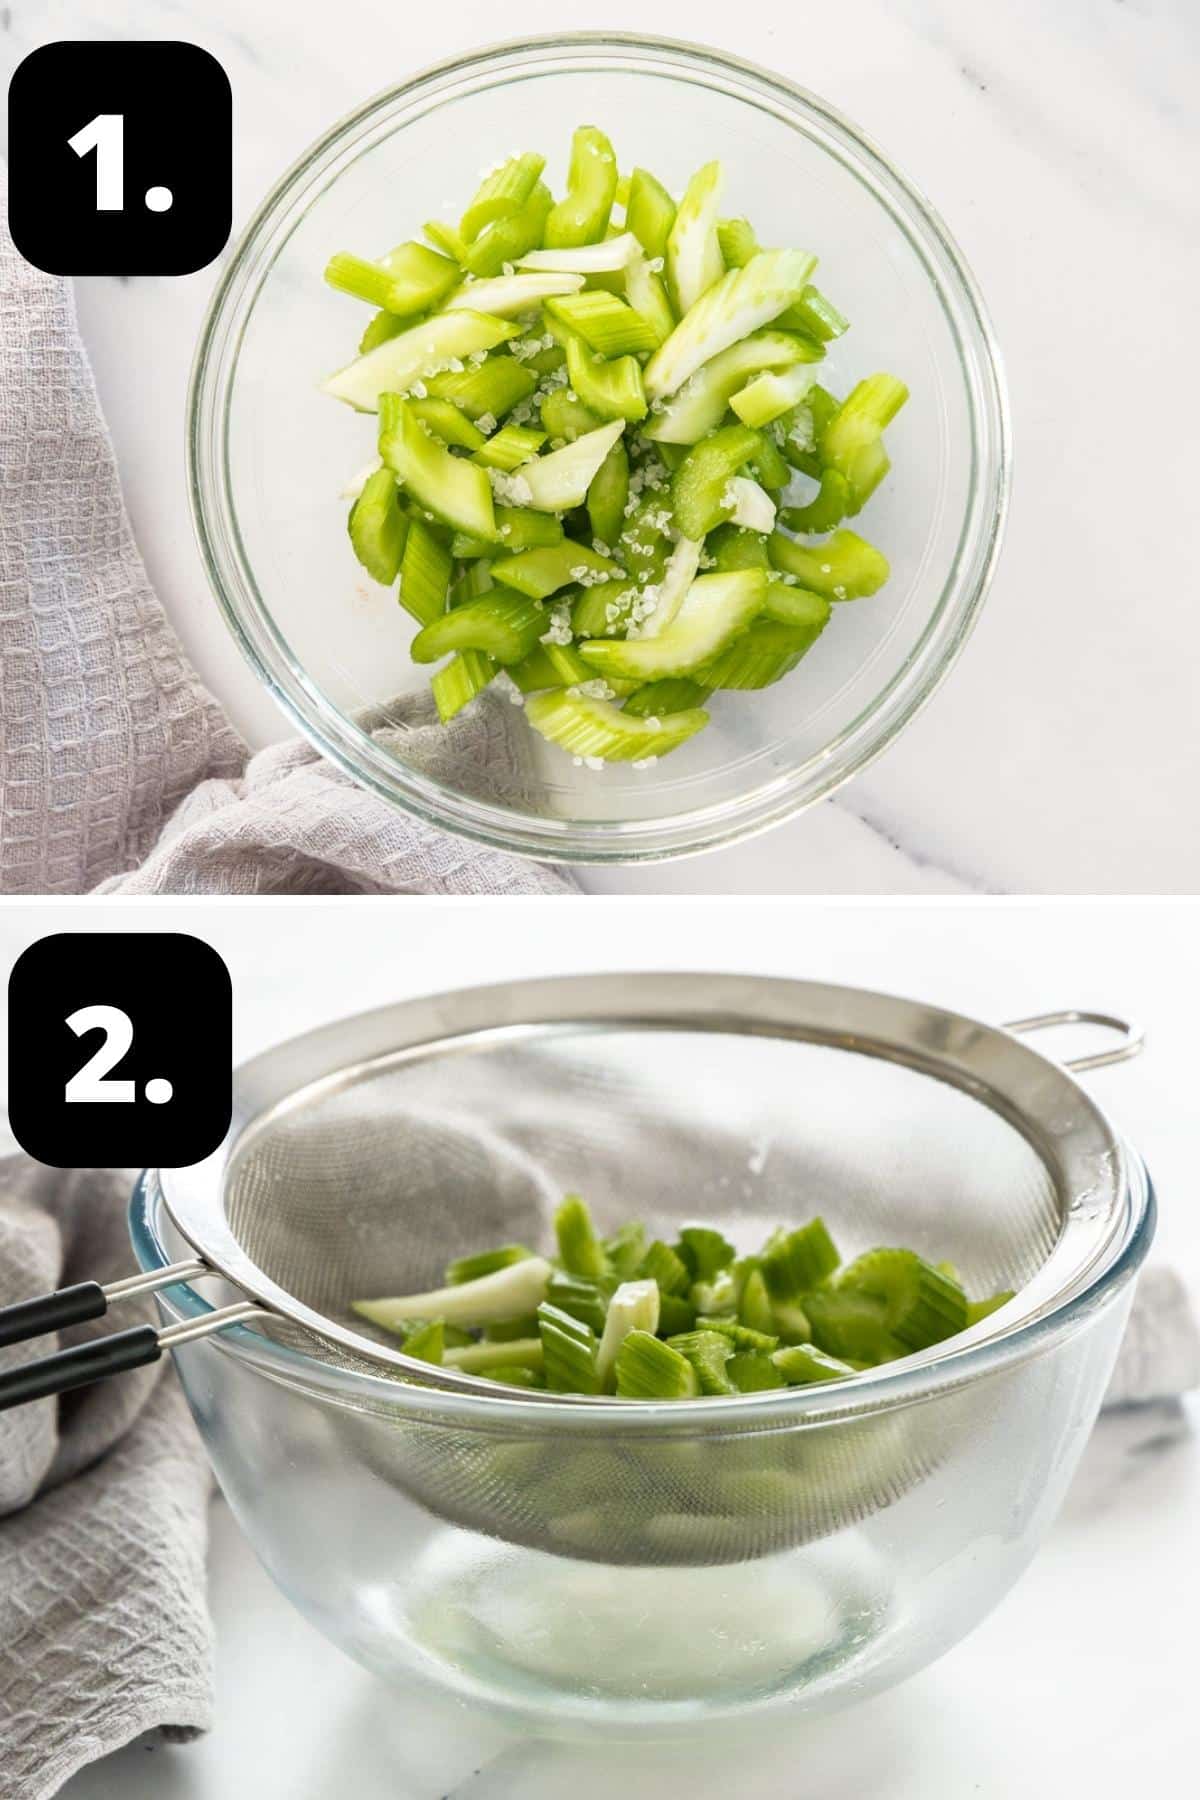 Steps 1-2 of preparing this recipe - the celery and salt in a glass bowl and draining the excess liquid from the celery.